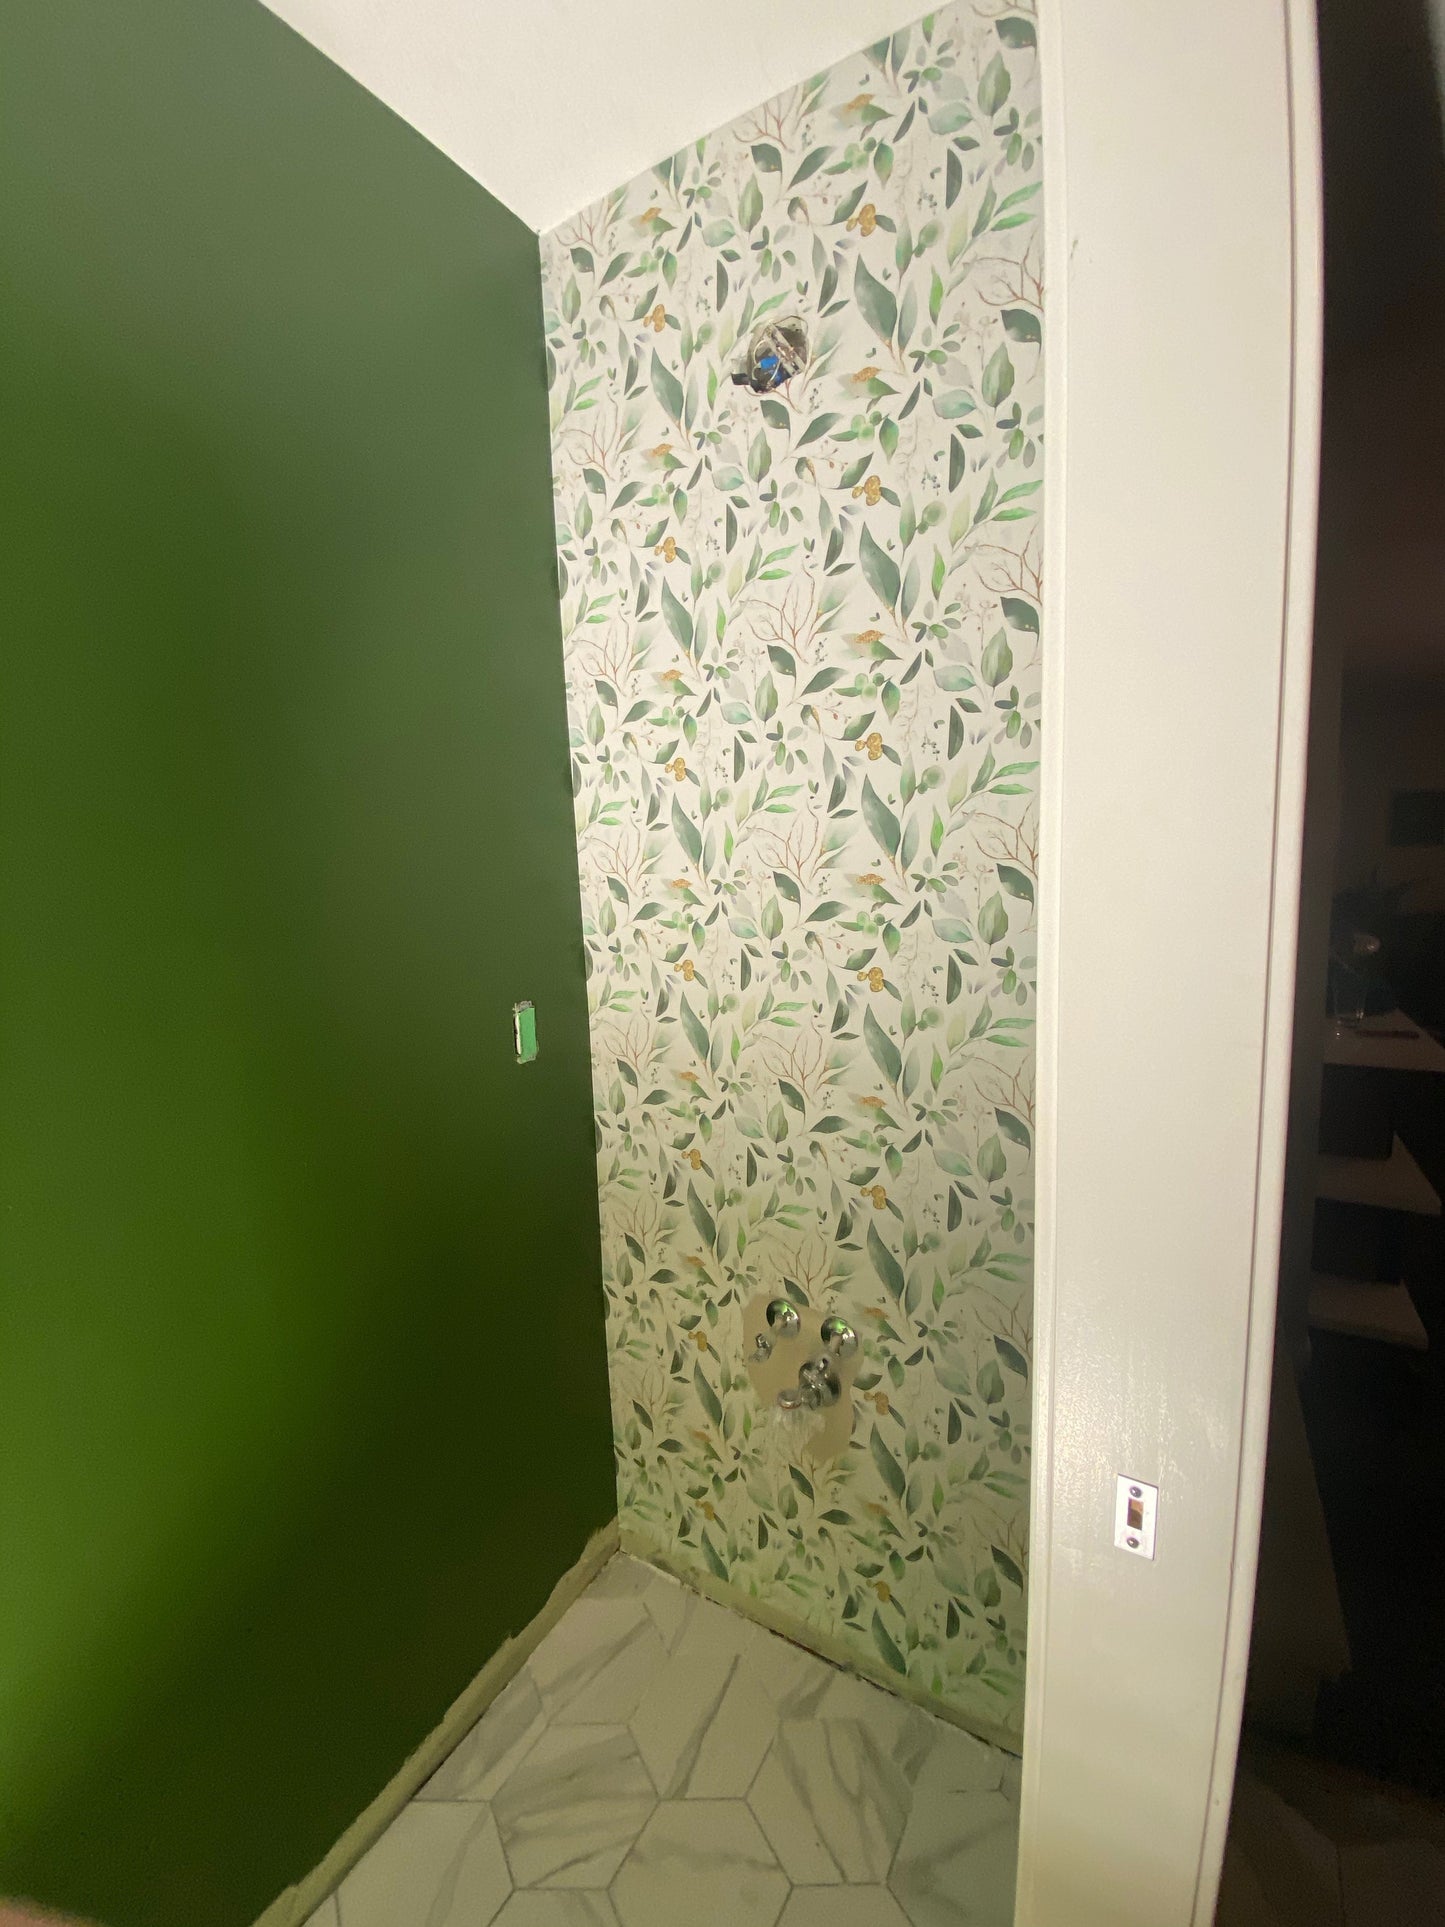 Emerald green greenery/foliage on white background easy to install and remove peel and stick custom wallpaper available in different lengths/sizes locally created and printed in Canada. Removable, washable, durable, commercial grade, customizable and water proof.